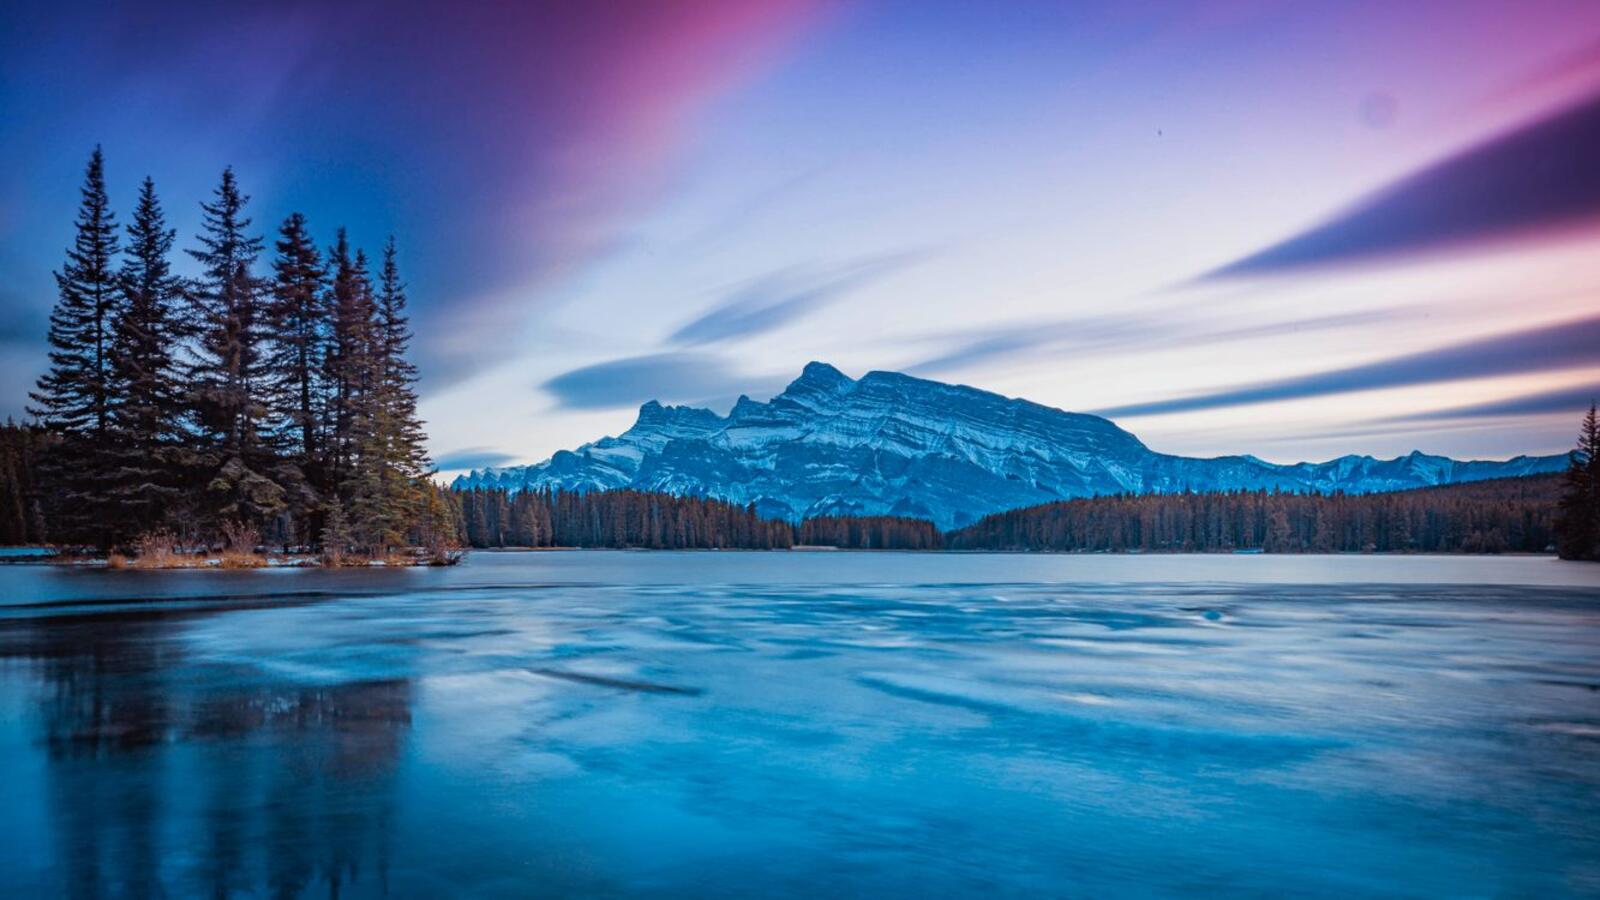 Wallpapers canada banff national park scenery on the desktop